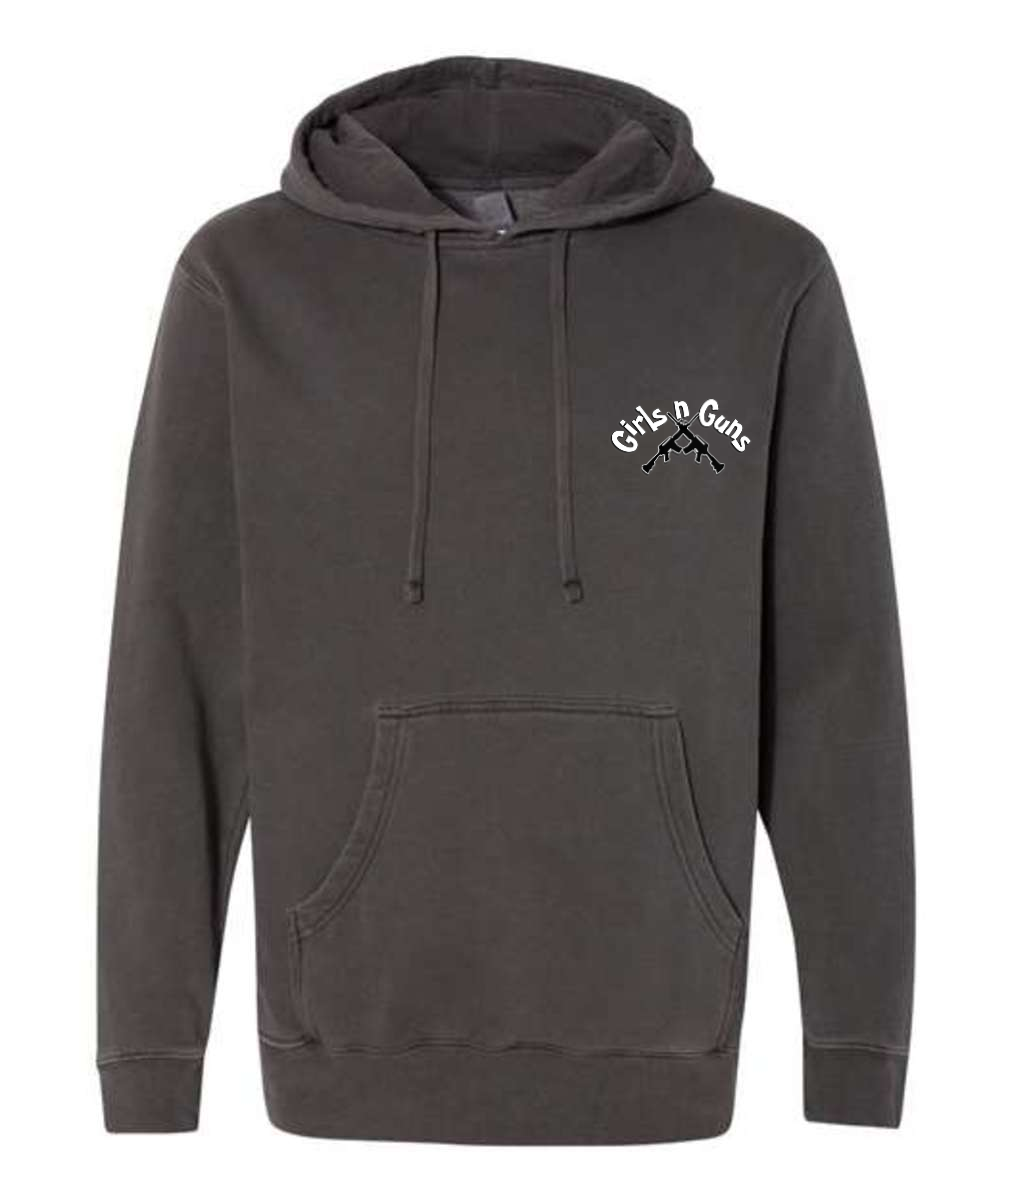 Girls n Guns print Independent Trading Co. - Unisex Midweight Pigment-Dyed Embroidered Hooded Sweatshirt